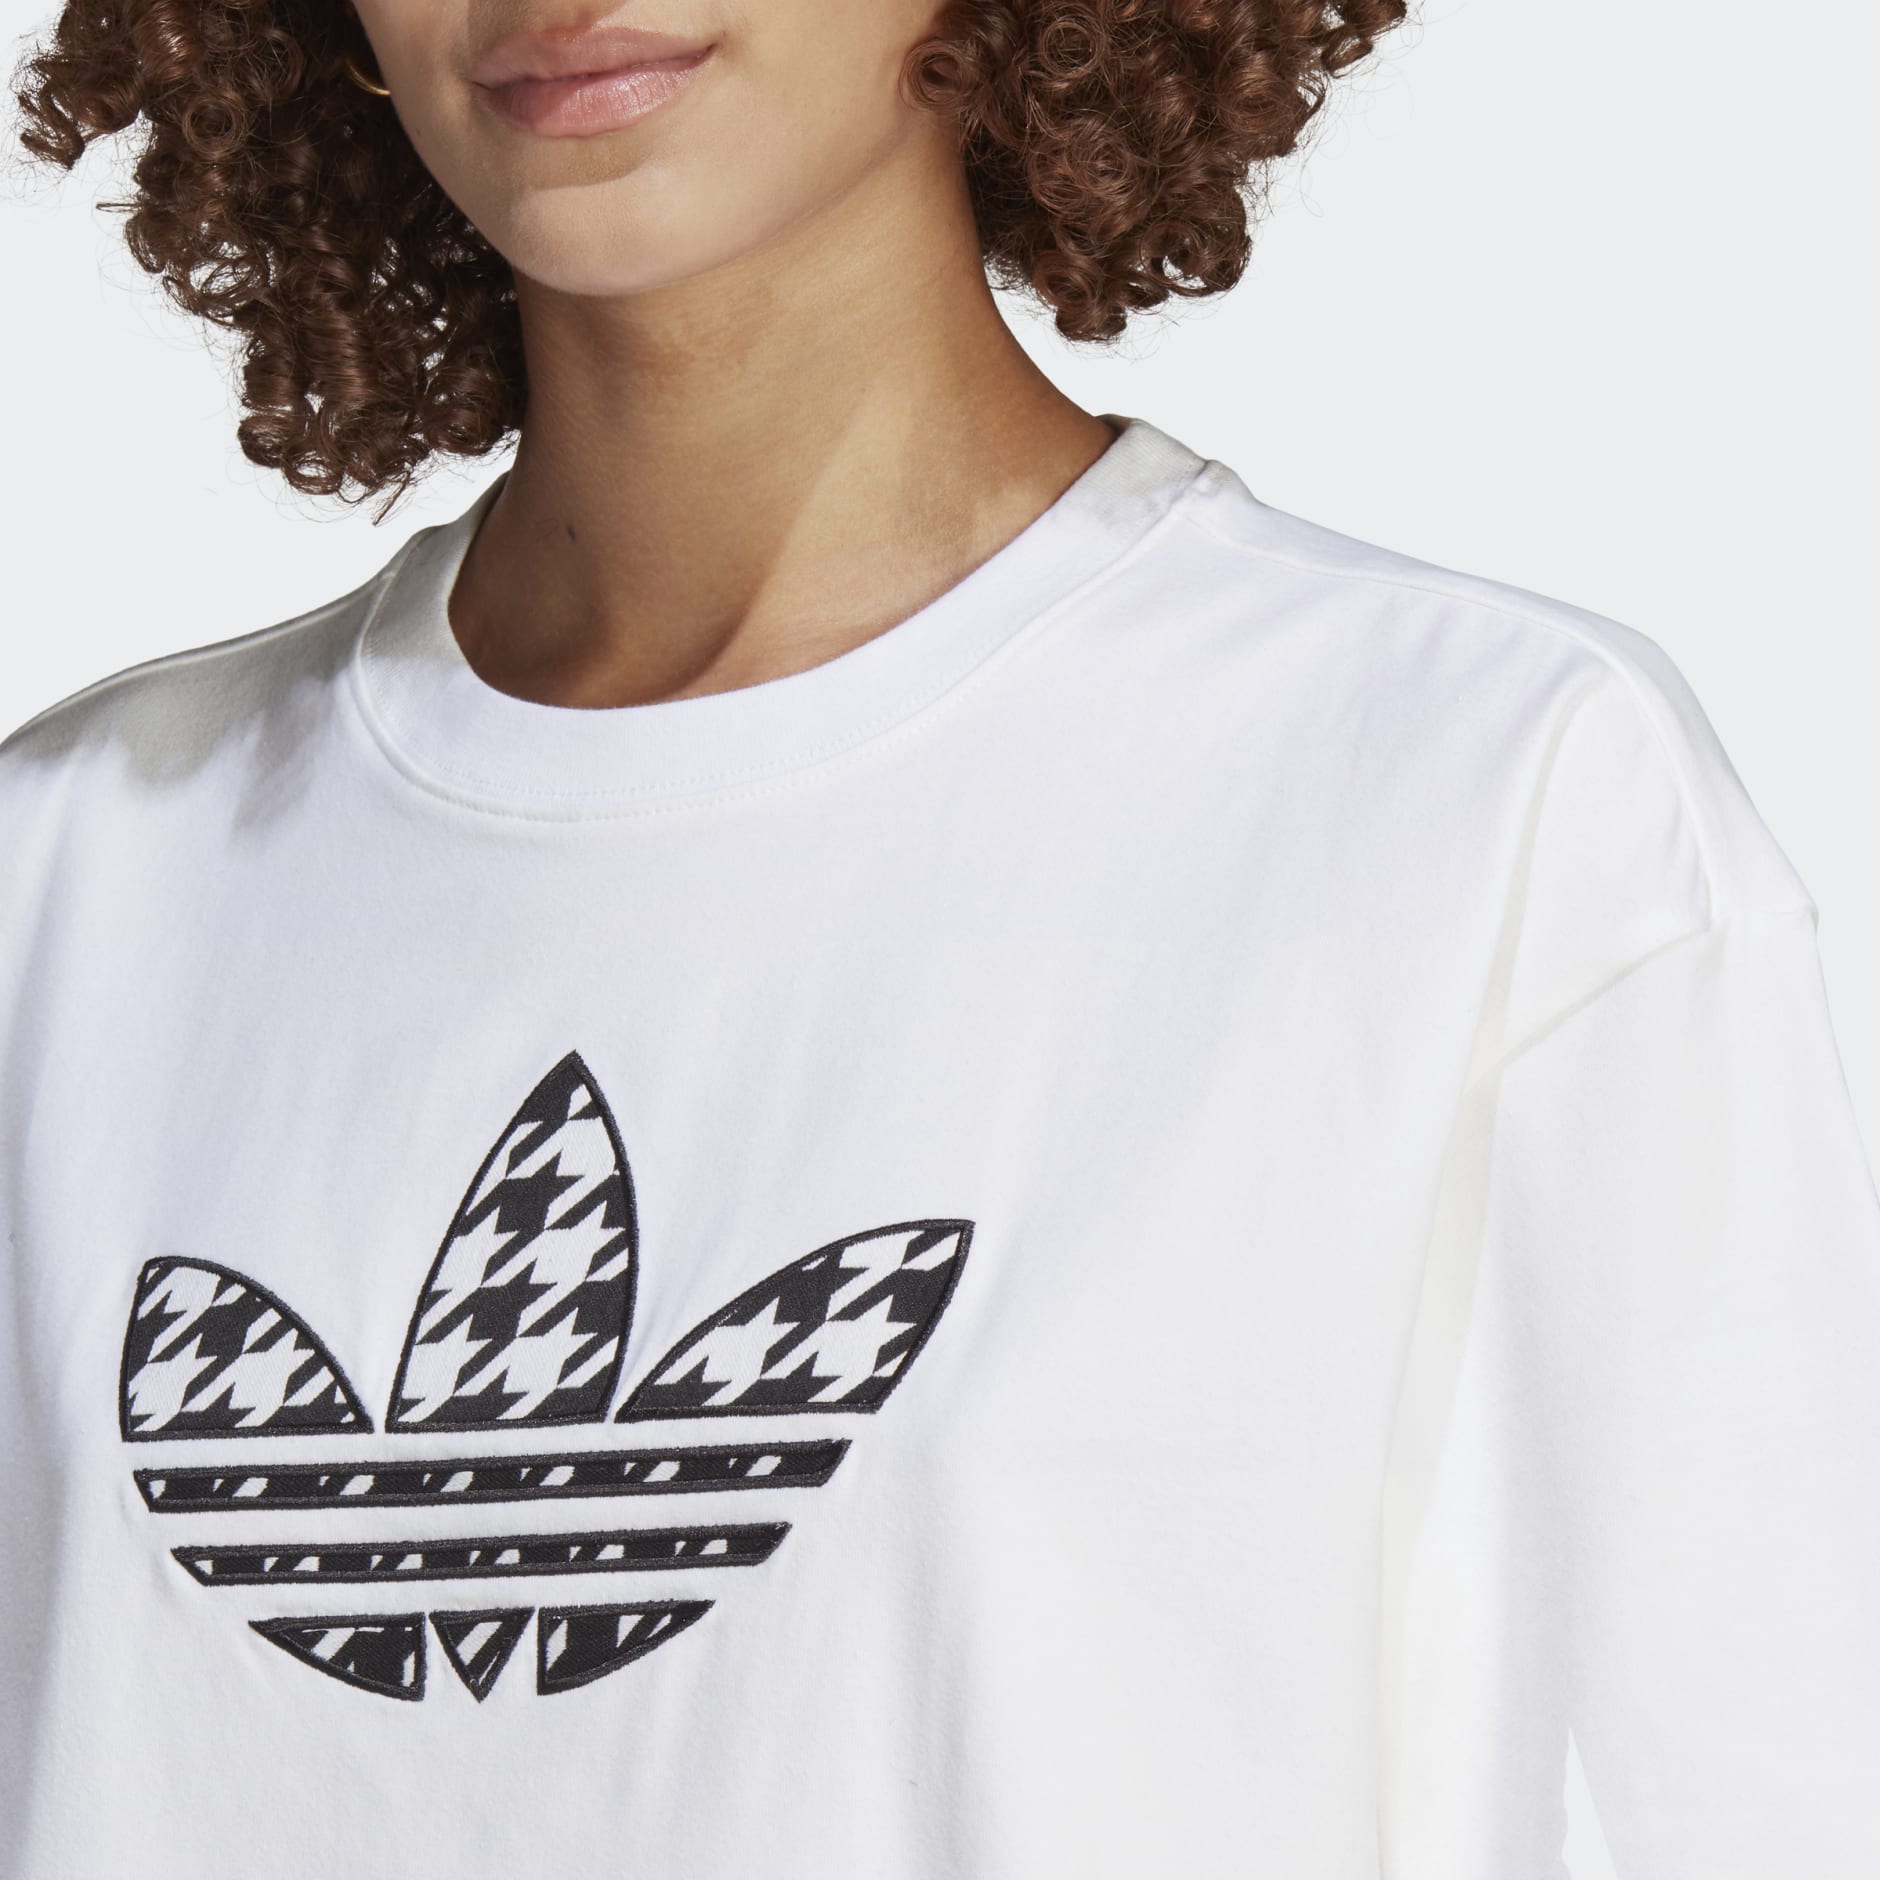 Women's Clothing - Originals Houndstooth Infill Tee - White | adidas Oman